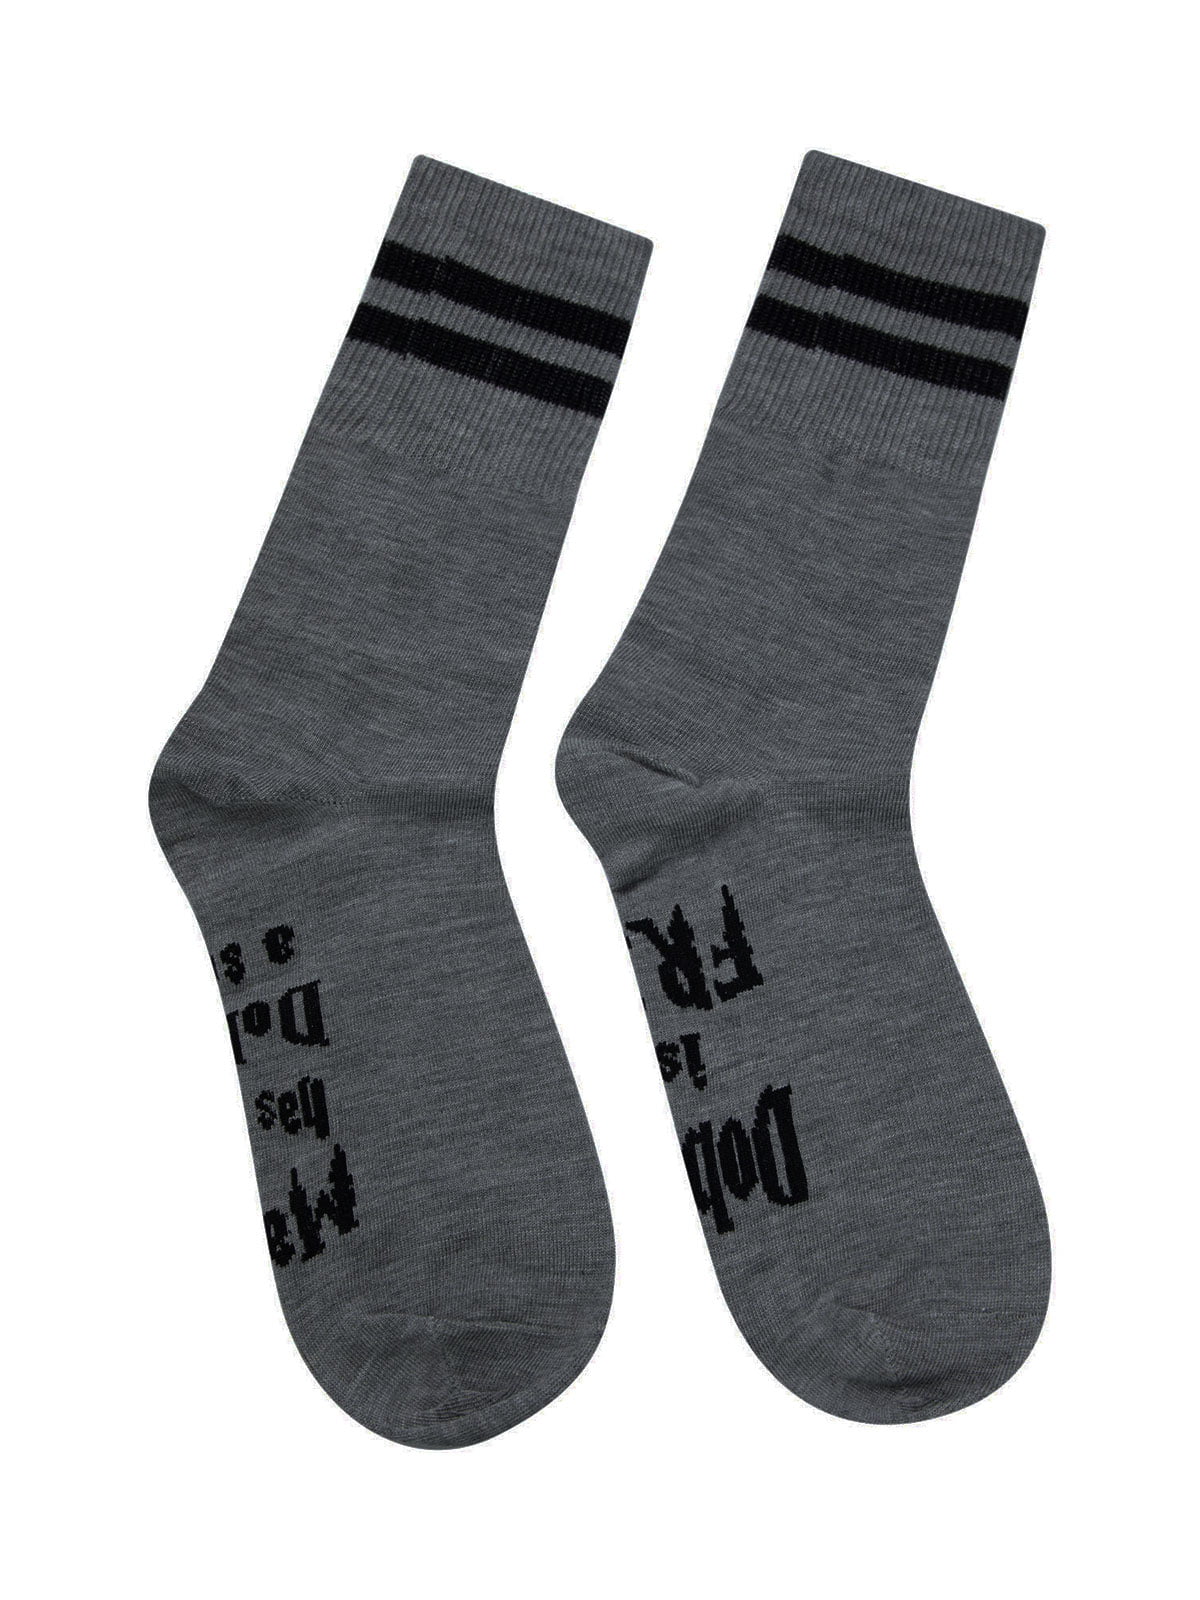 Unisex Womens Mens Sock Printed "Master has given Dobby a sock Dobby is free" t 